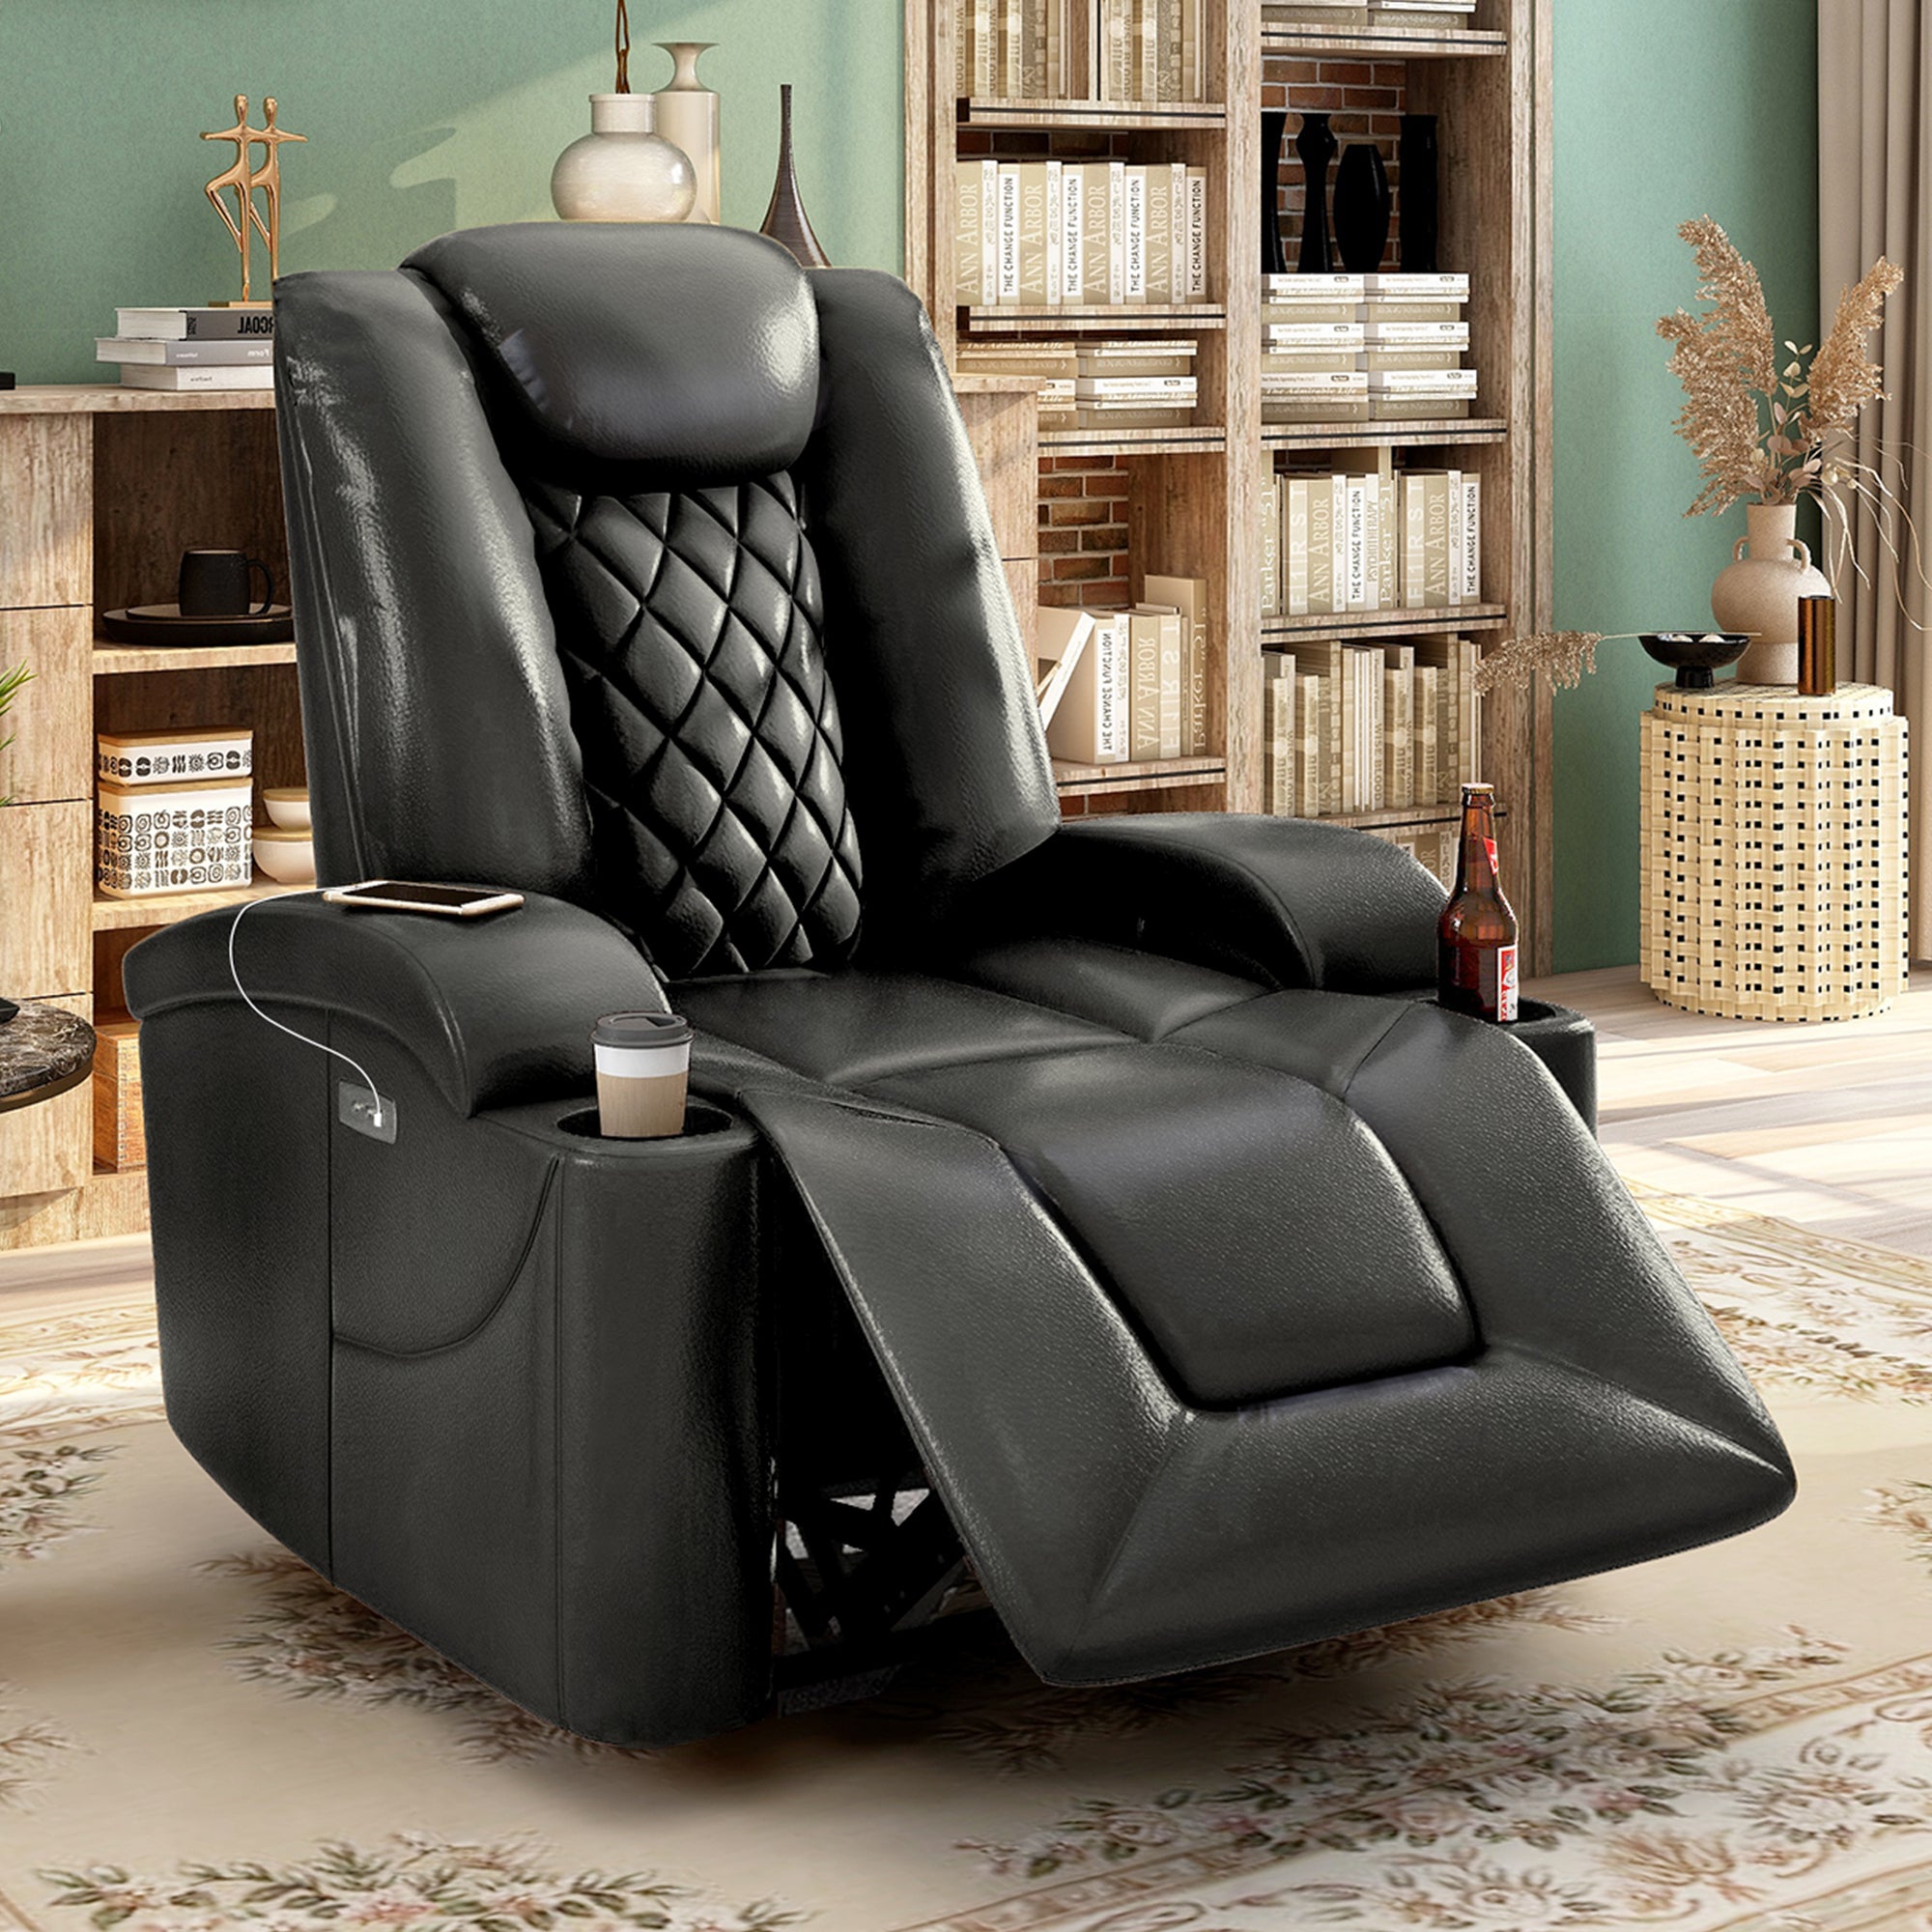 Oris Fur Power Motion Recliner with USB Charging Port and Two Cup Holders